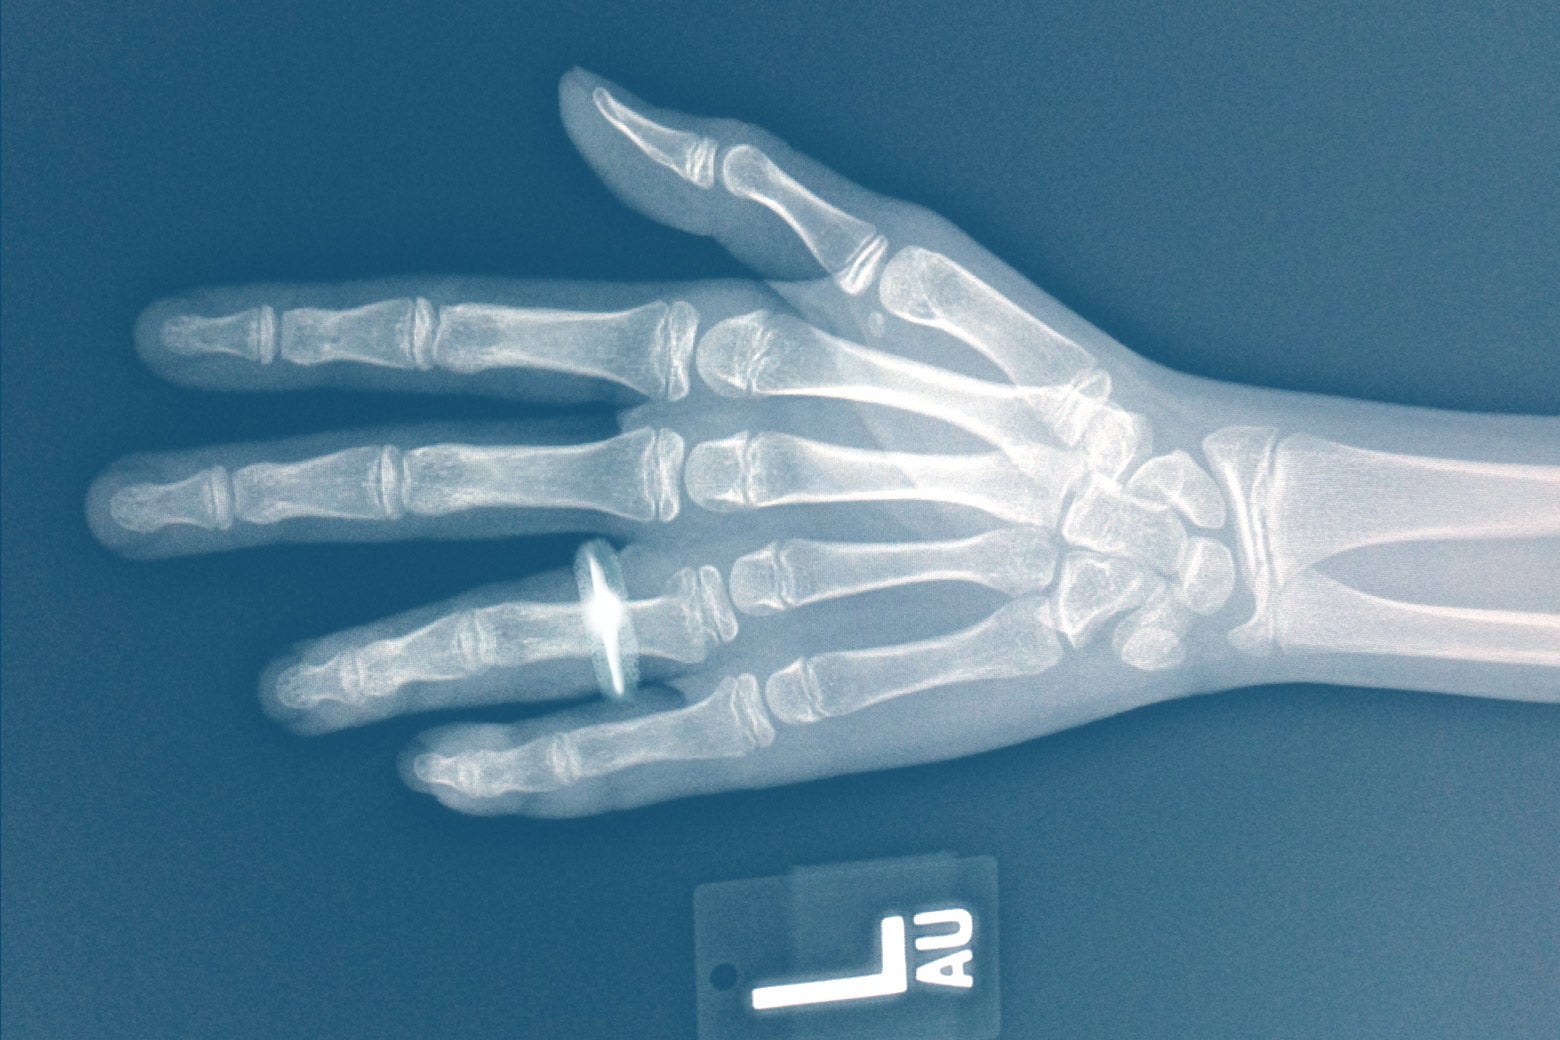 X-ray of a left hand wearing a wedding ring.